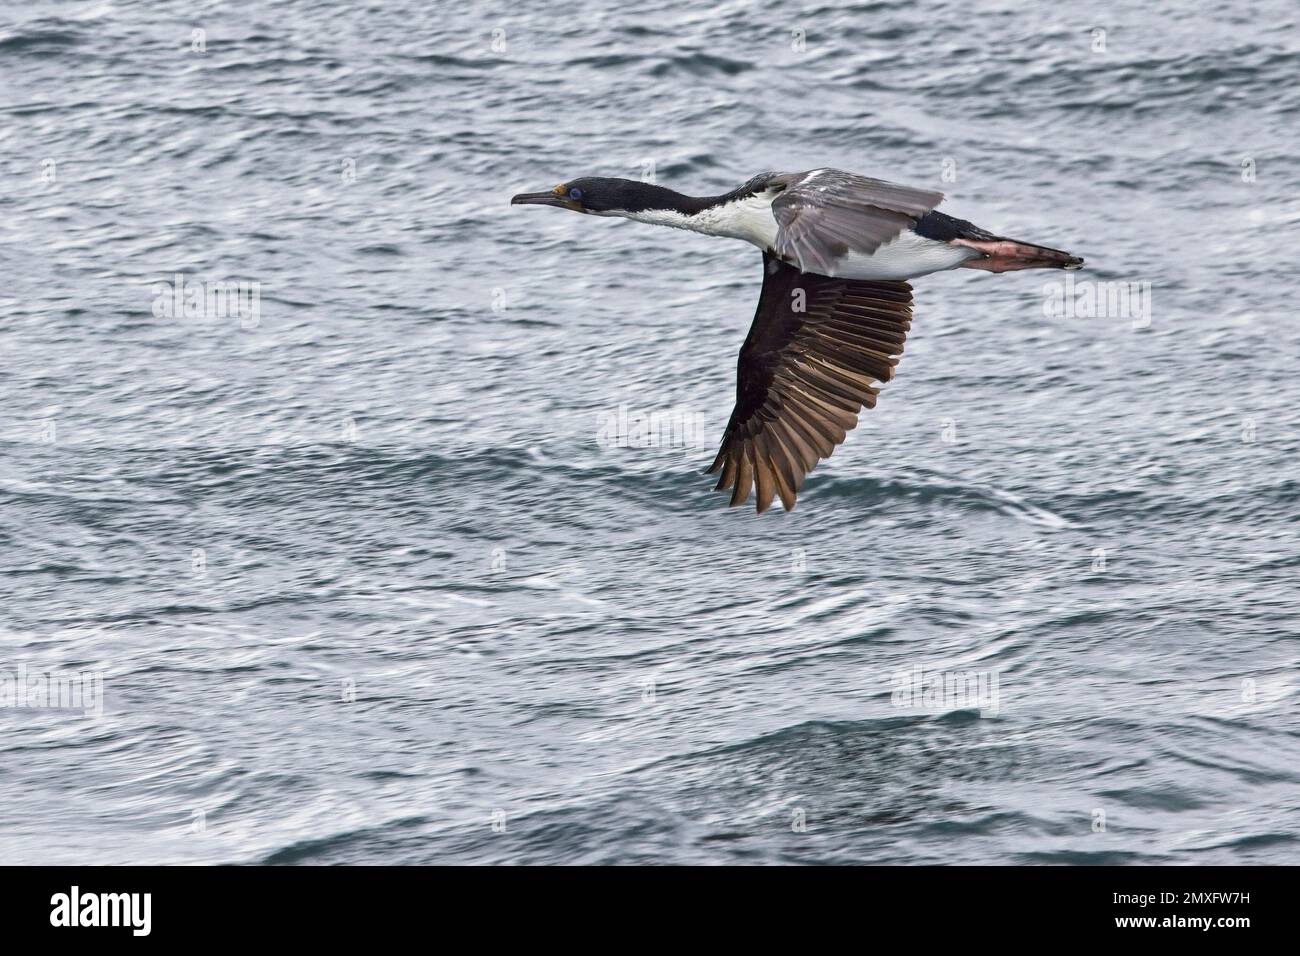 Imperial Shag (Leucocarbo atriceps), flying over the Beagle Channel, Tierra del Fuego, Patagonia, Argentina. Stock Photo